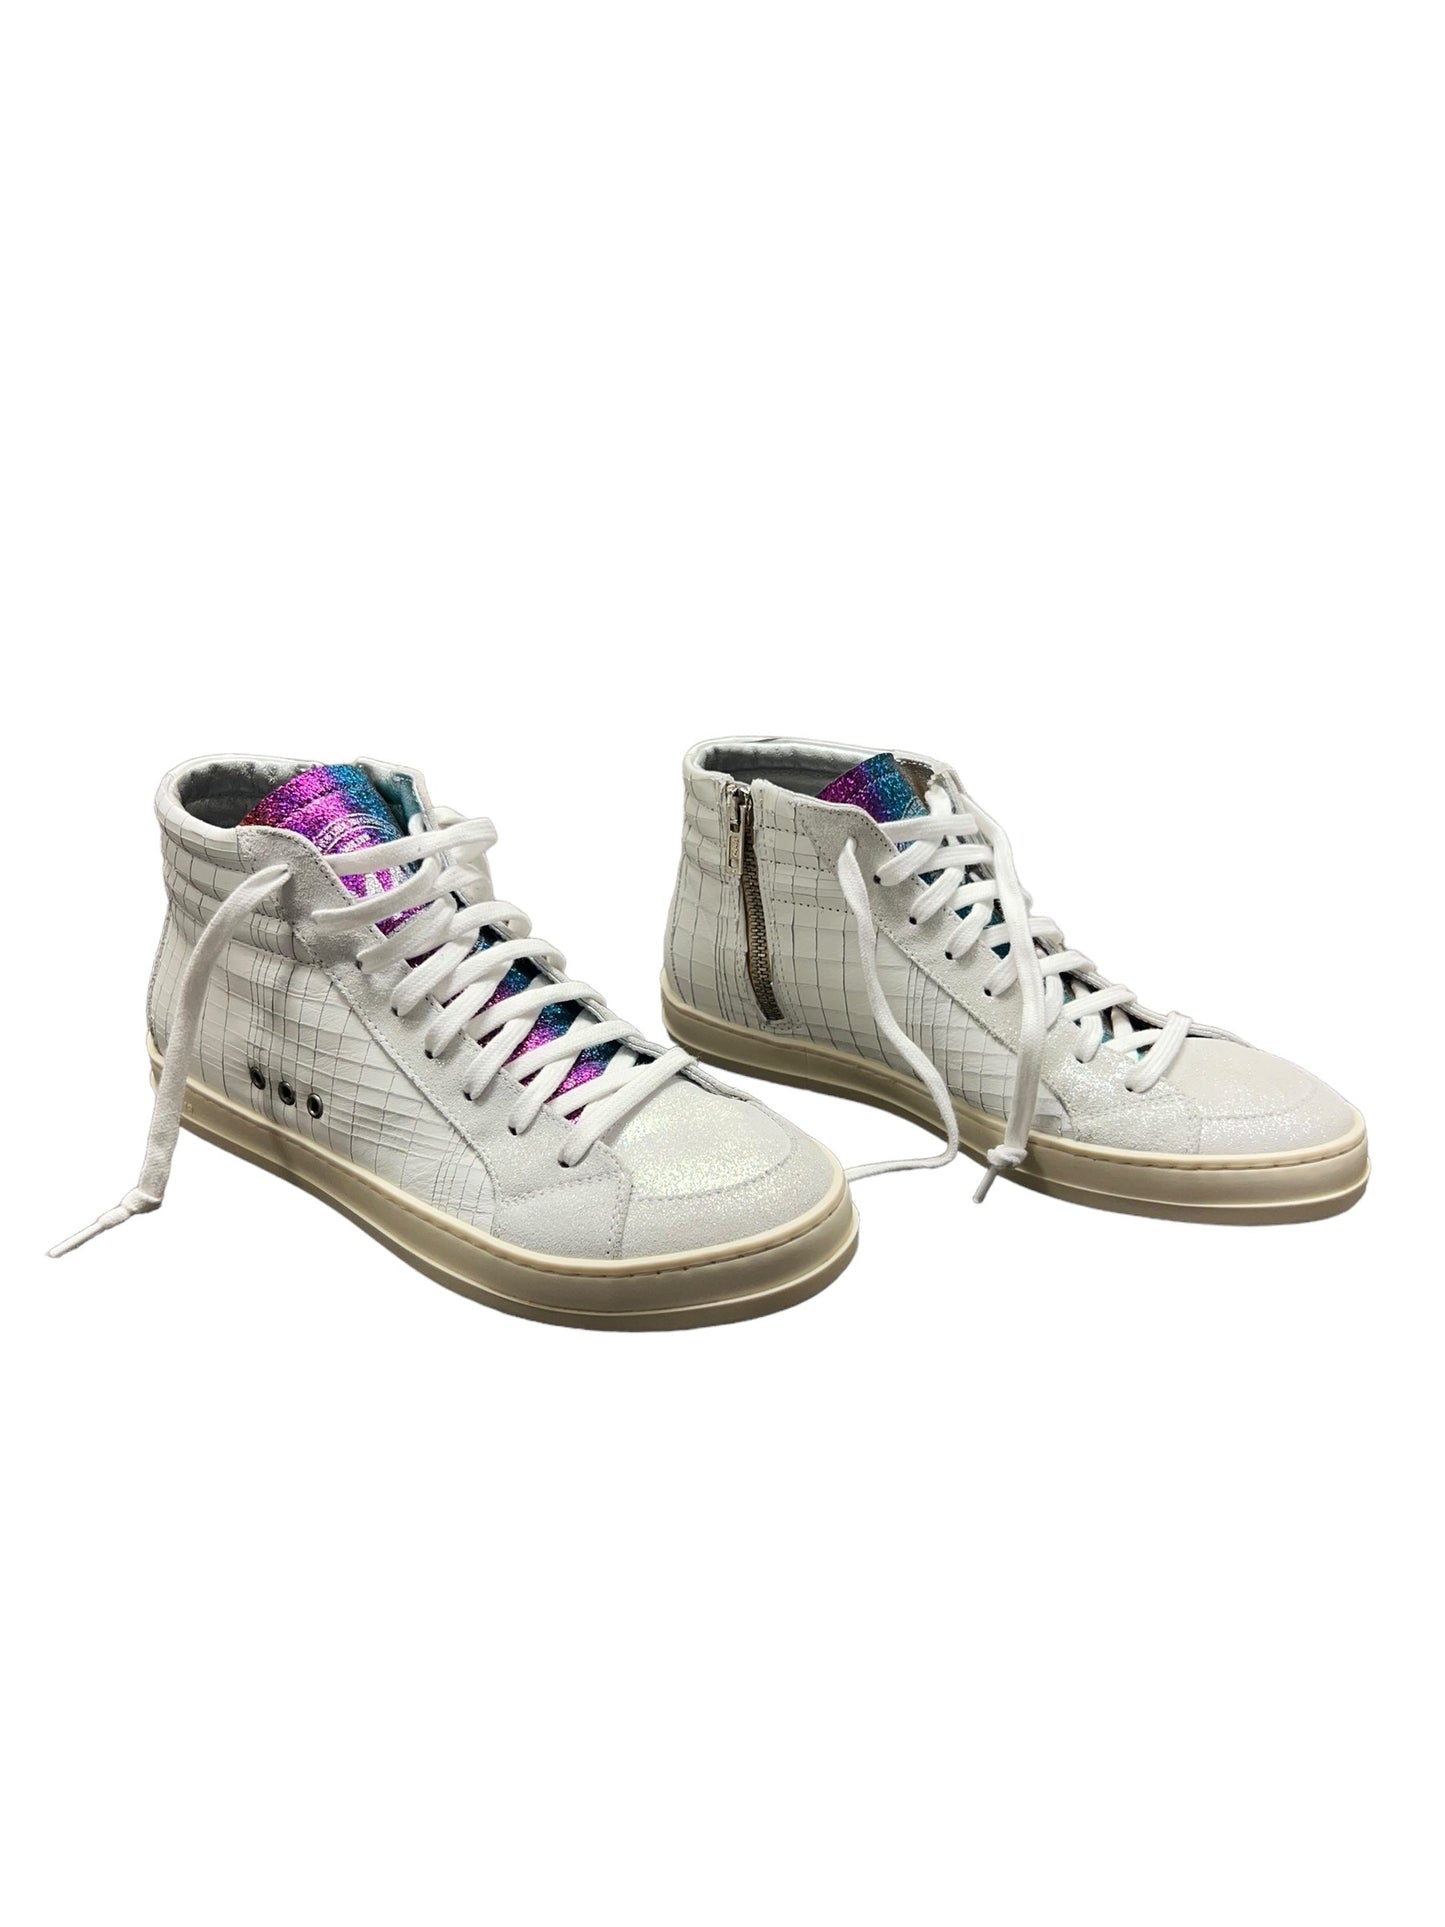 Shoes Sneakers By P448  Size: 7.5